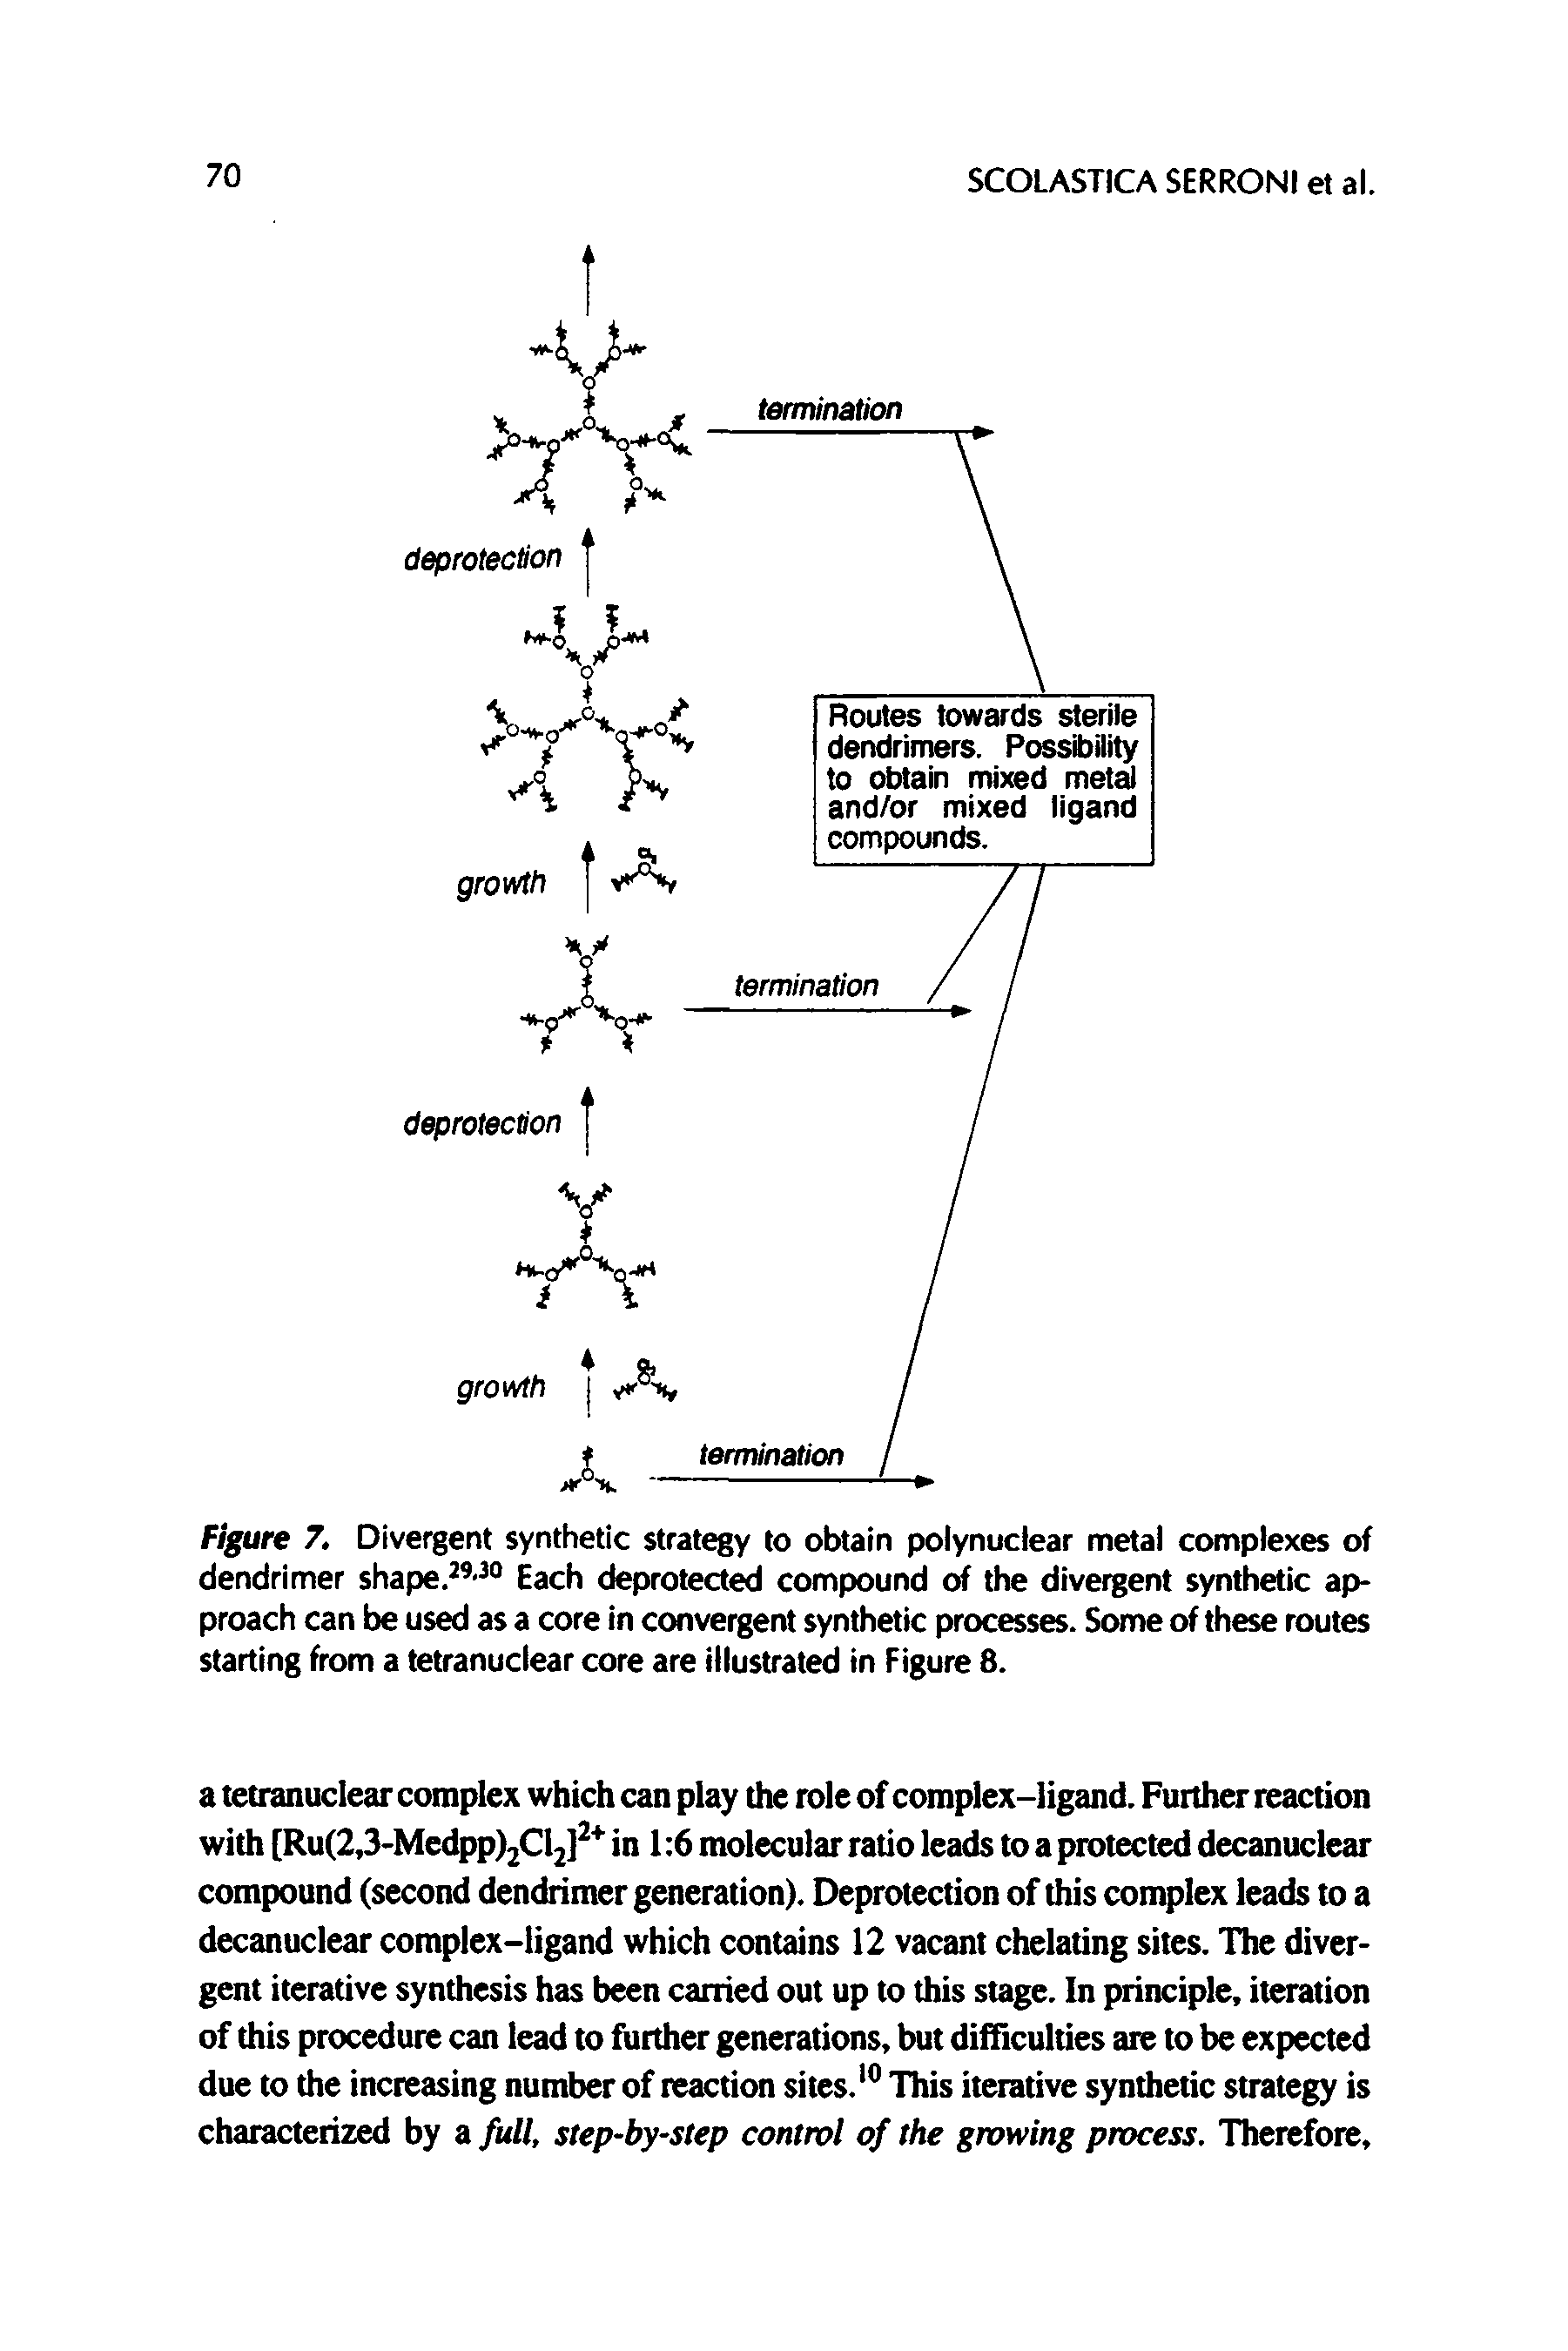 Figure 7. Divergent synthetic strategy to obtain polynuclear metal complexes of dendrimer shape. - ° Each deprotected compound of the dive ent synthetic approach can be used as a core in convergent synthetic processes. Some of these routes starting from a tetranuclear core are illustrated in Figure 8.